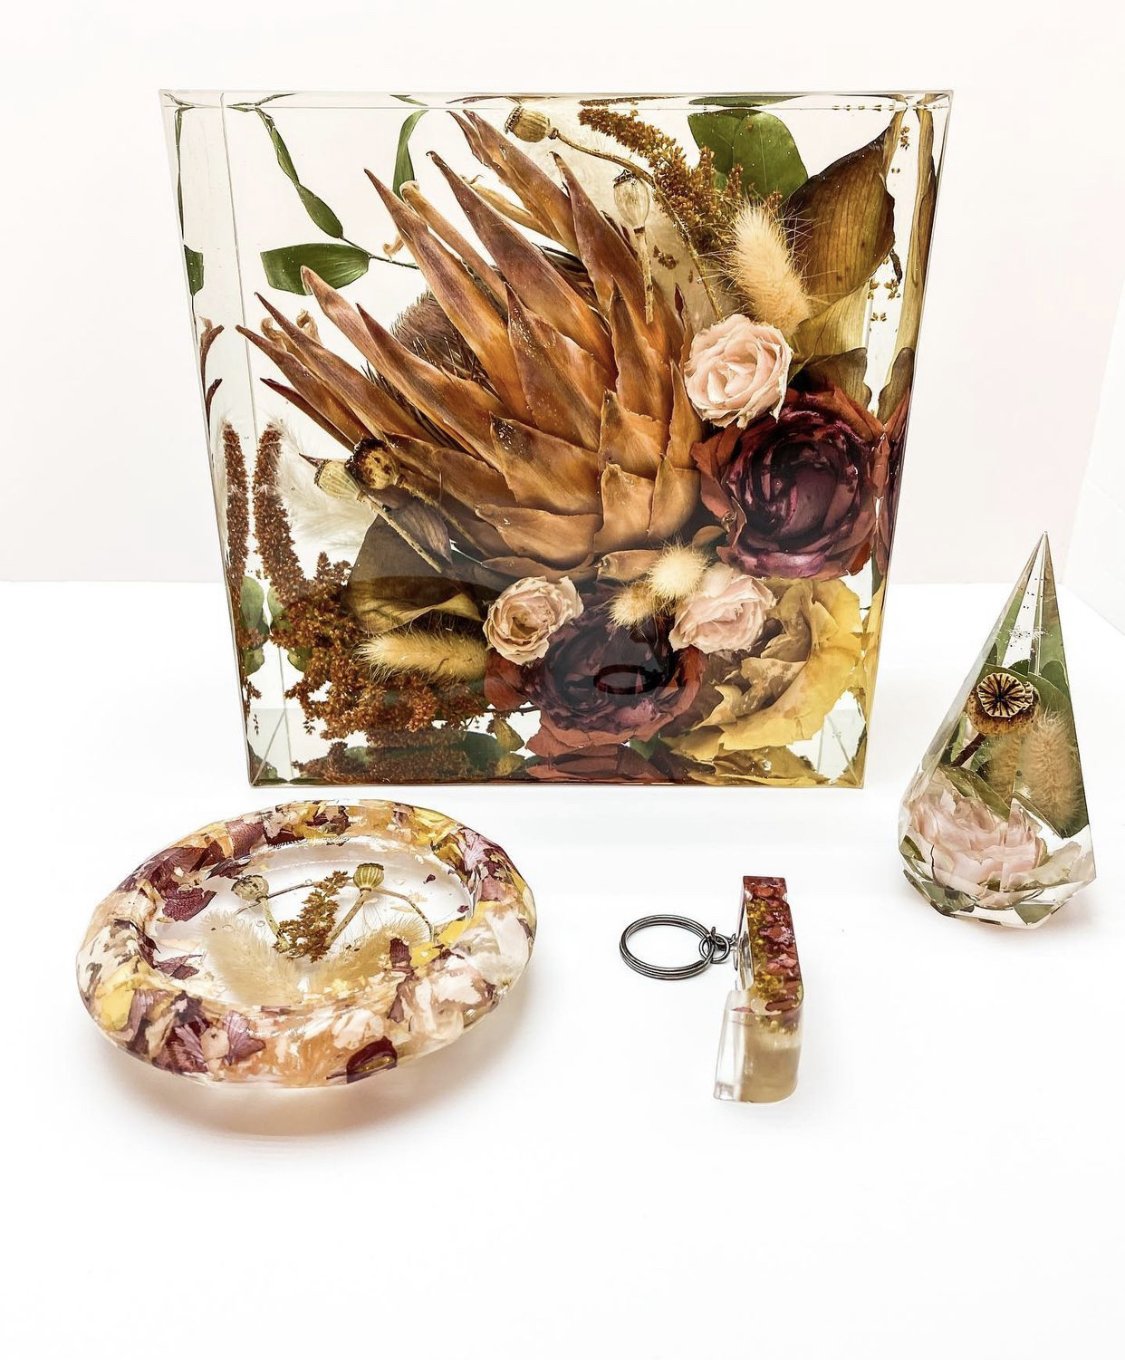  Jessica Spain’s floral preservation art from Once Upon a Bloom AL. 